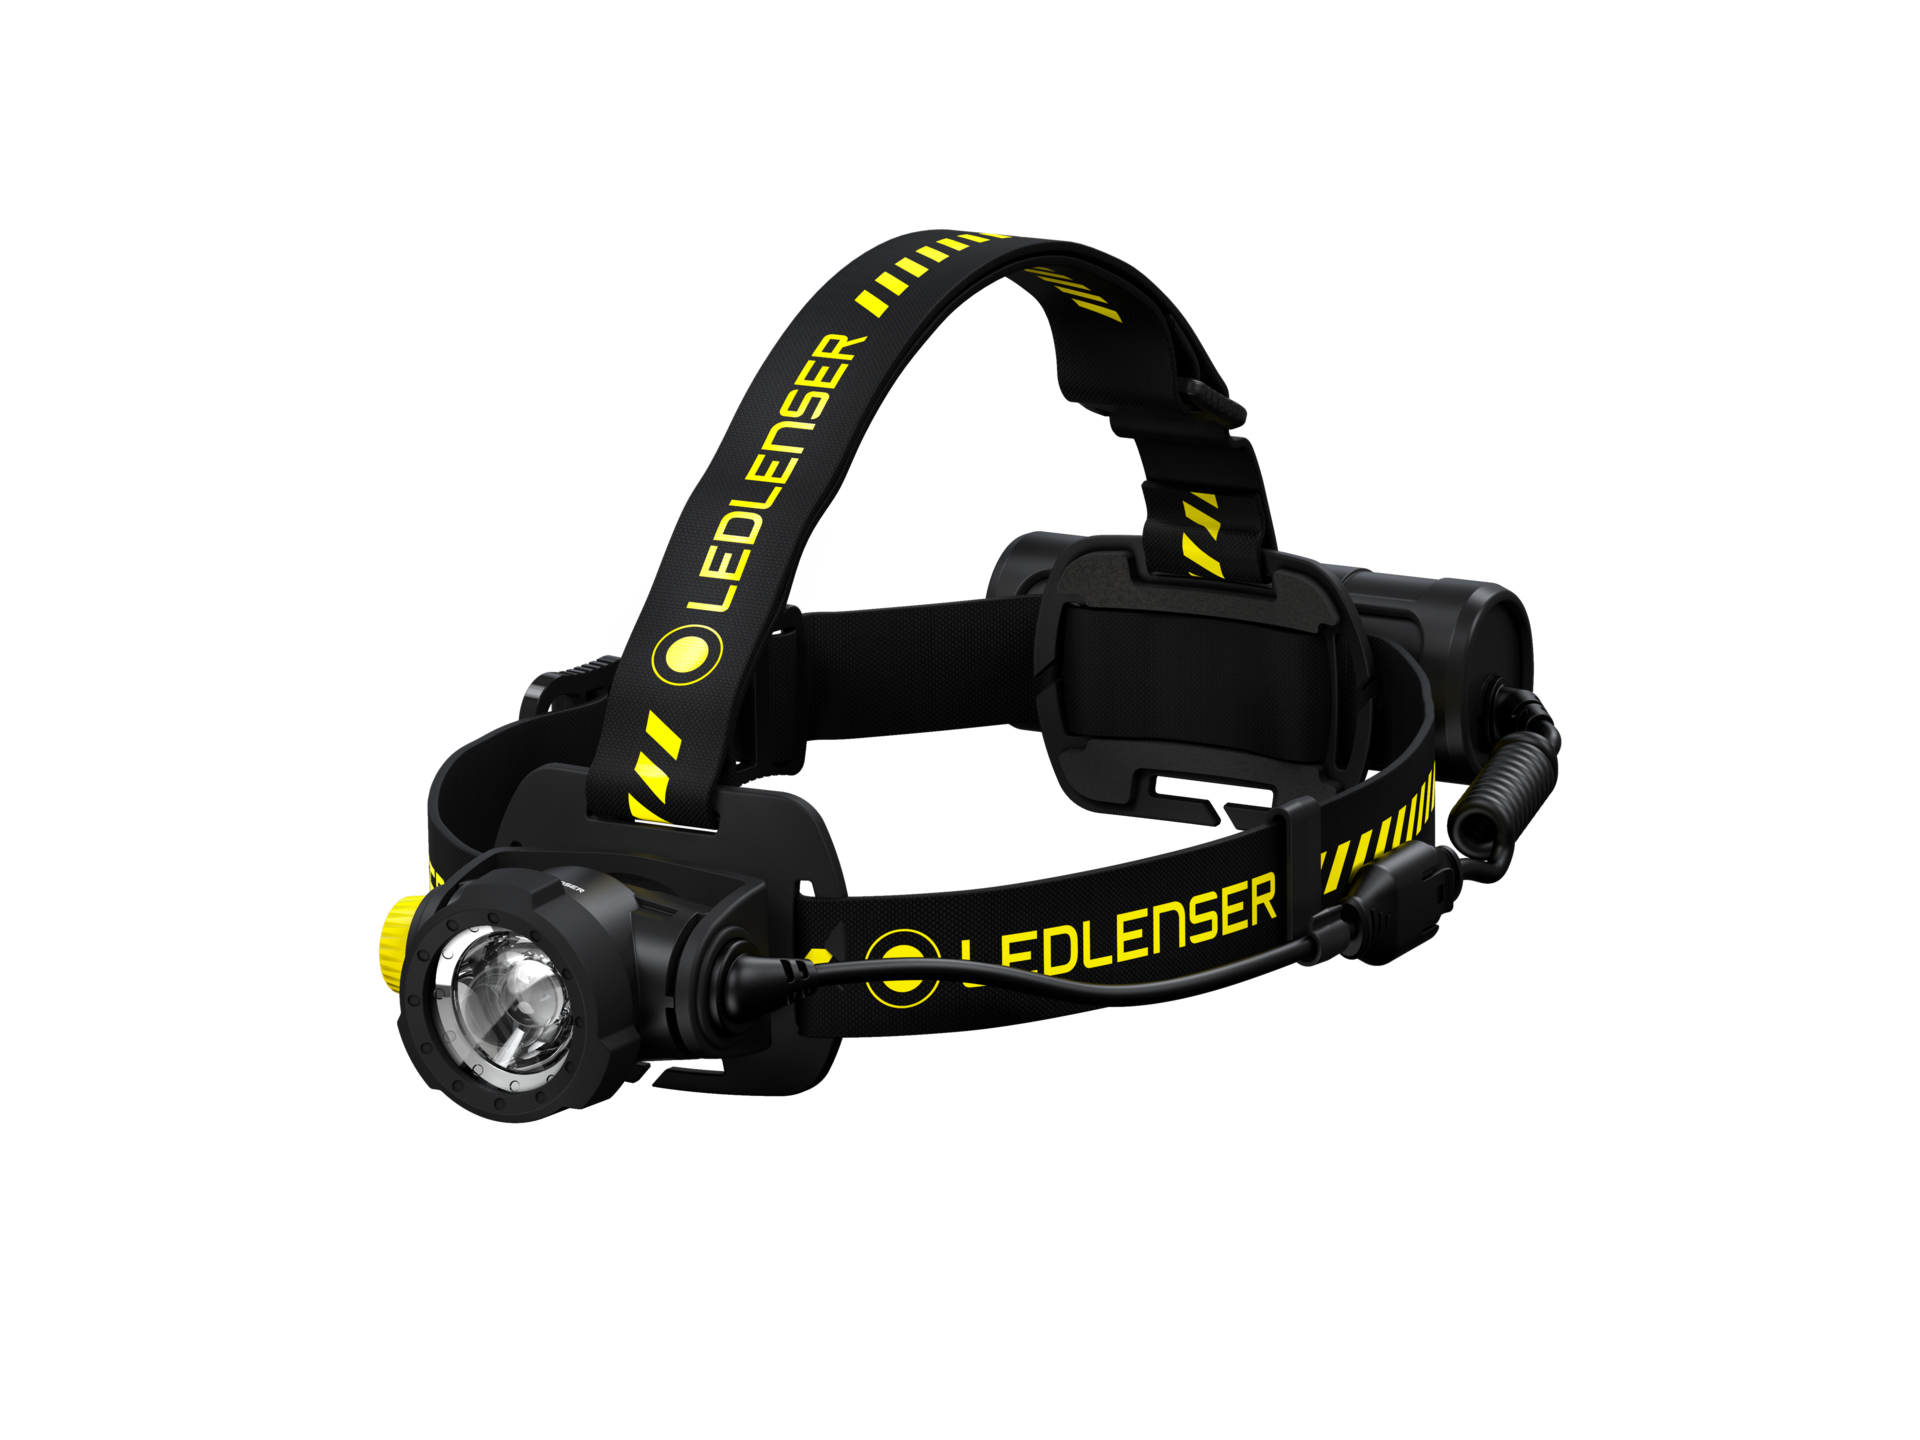 H7R Core - Compact, powerful and versatile headlamp